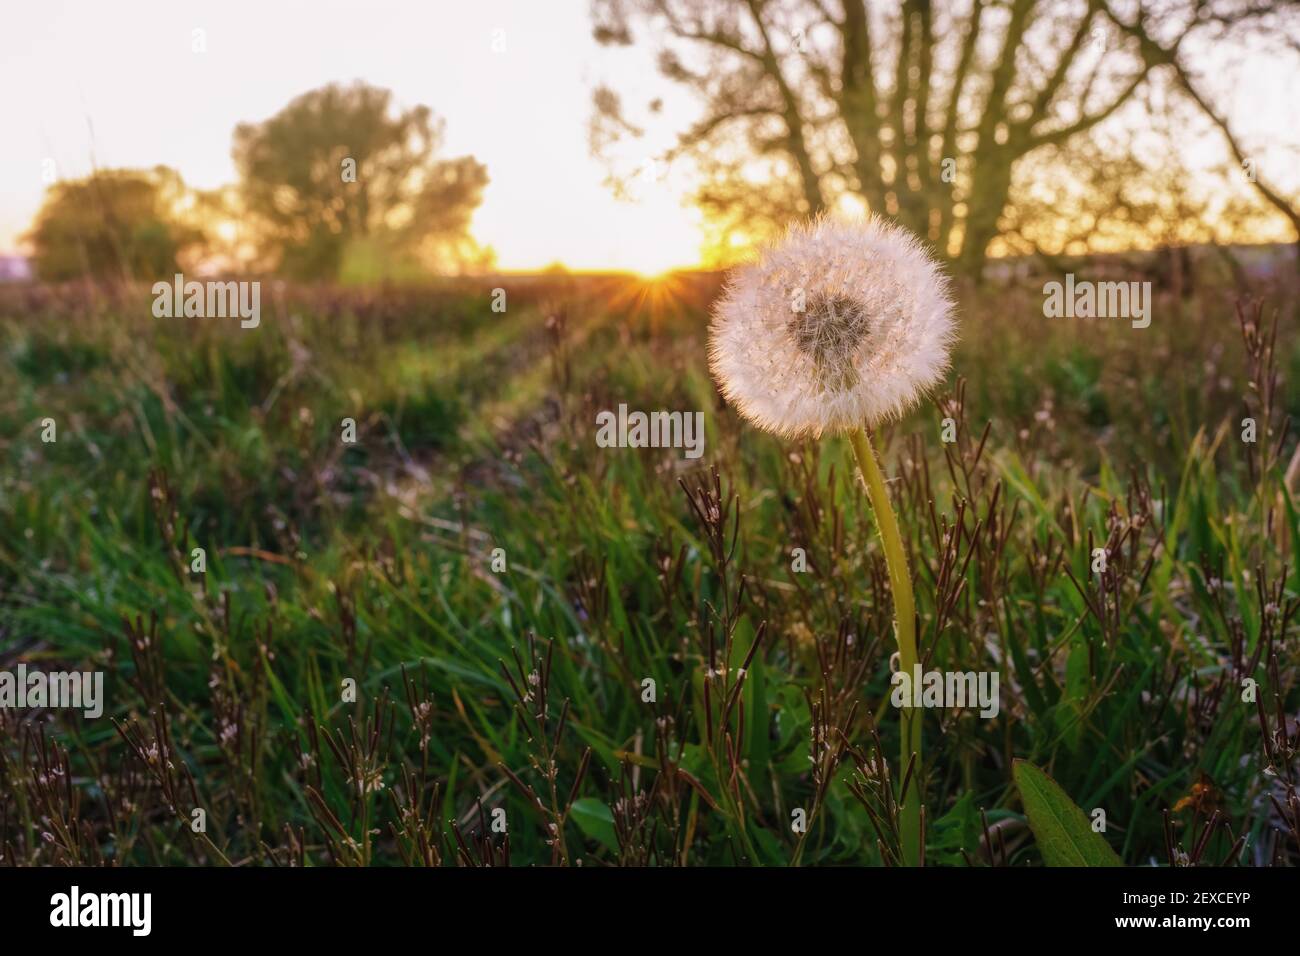 A dandelion in the evening red light of the evening sun, close-up Stock Photo